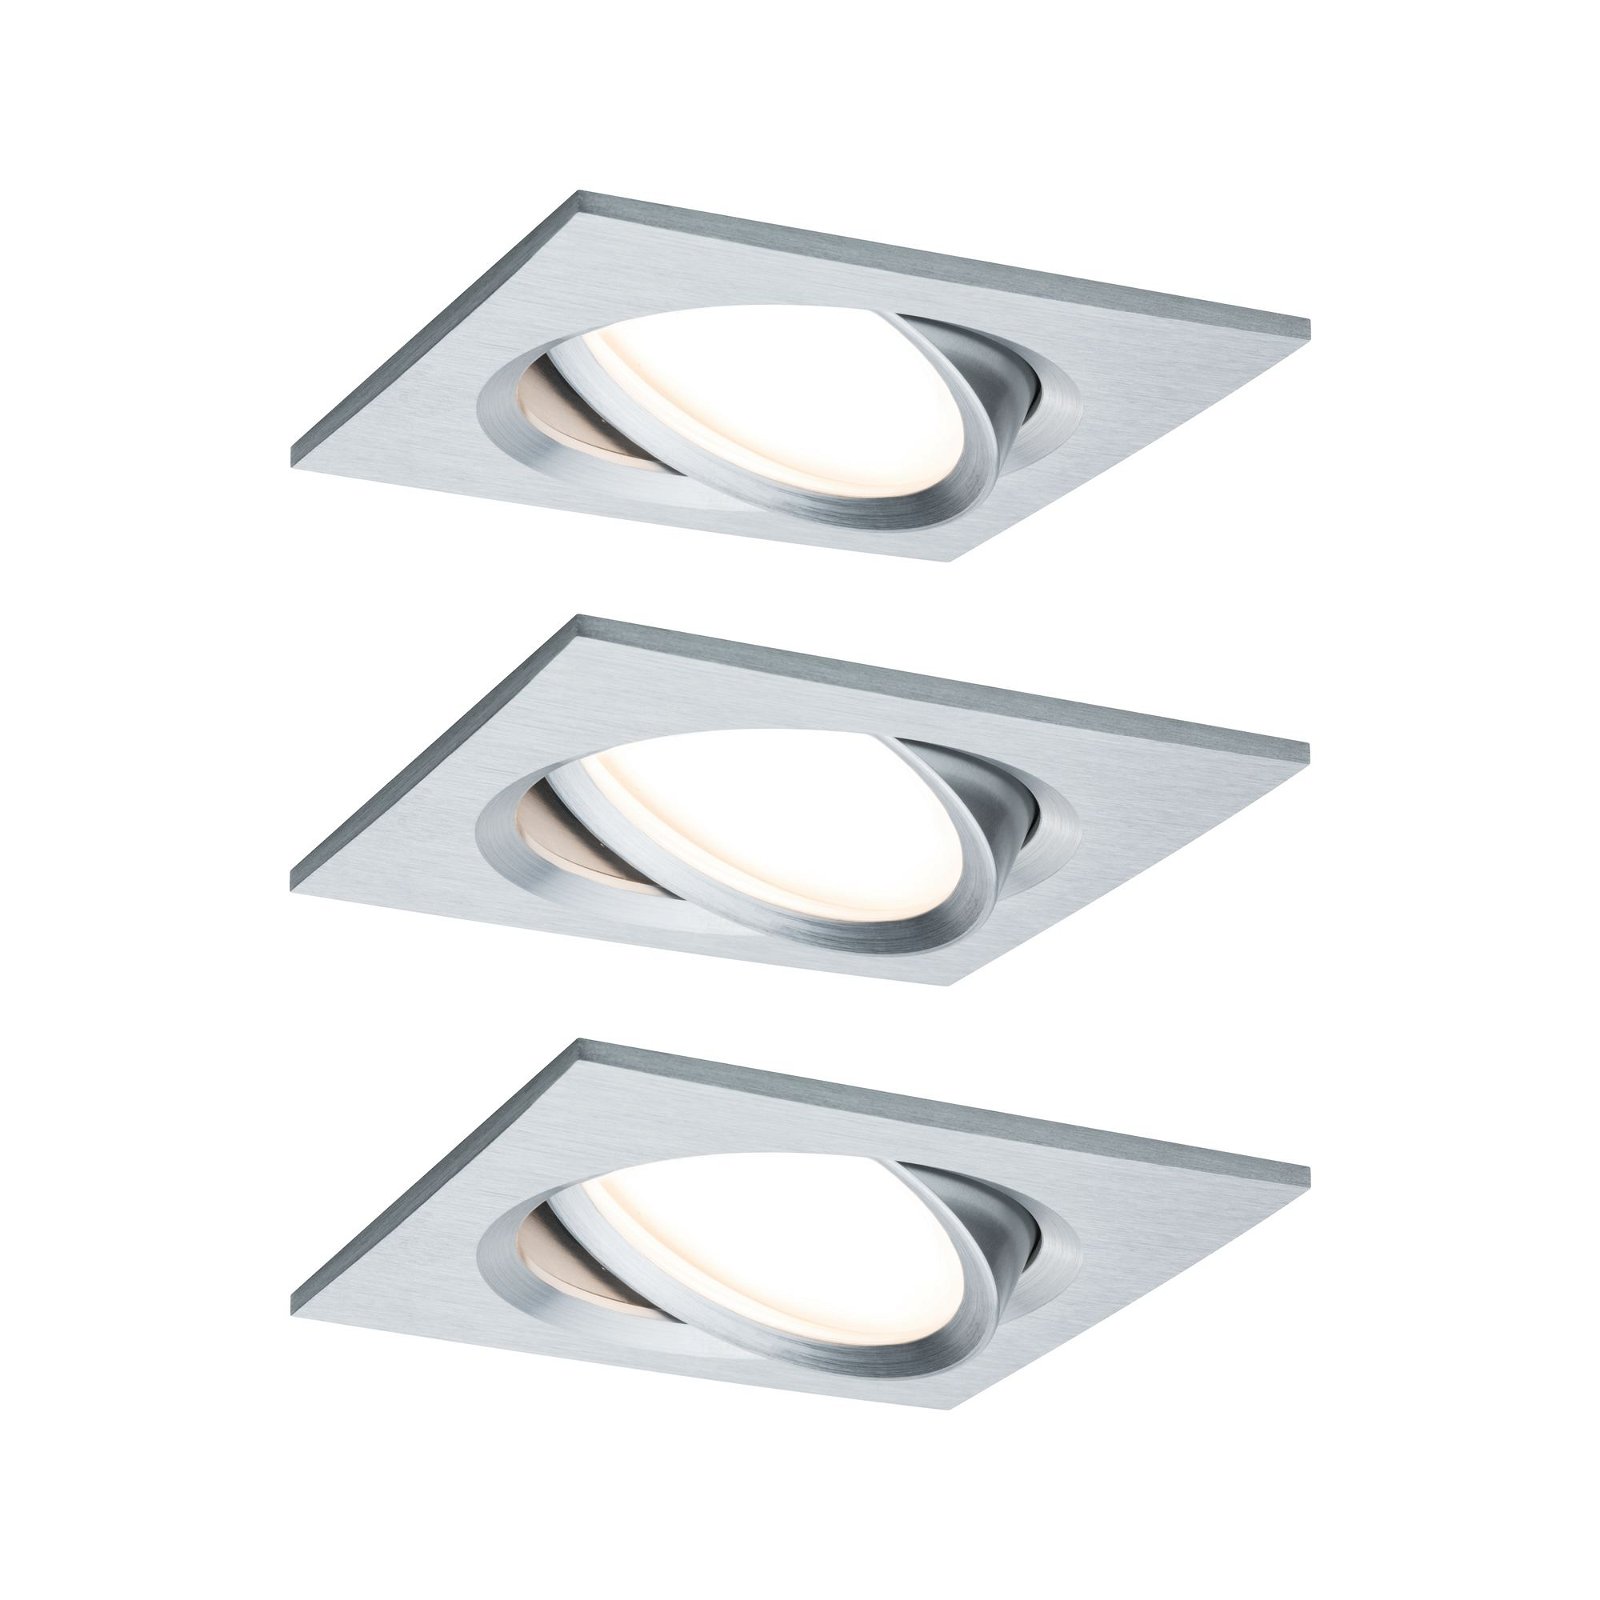 LED Recessed luminaire Nova Plus Coin Basic Set Swivelling square 84x84mm 50° Coin 3x6W 3x470lm 230V dimmable 2700K Turned aluminium